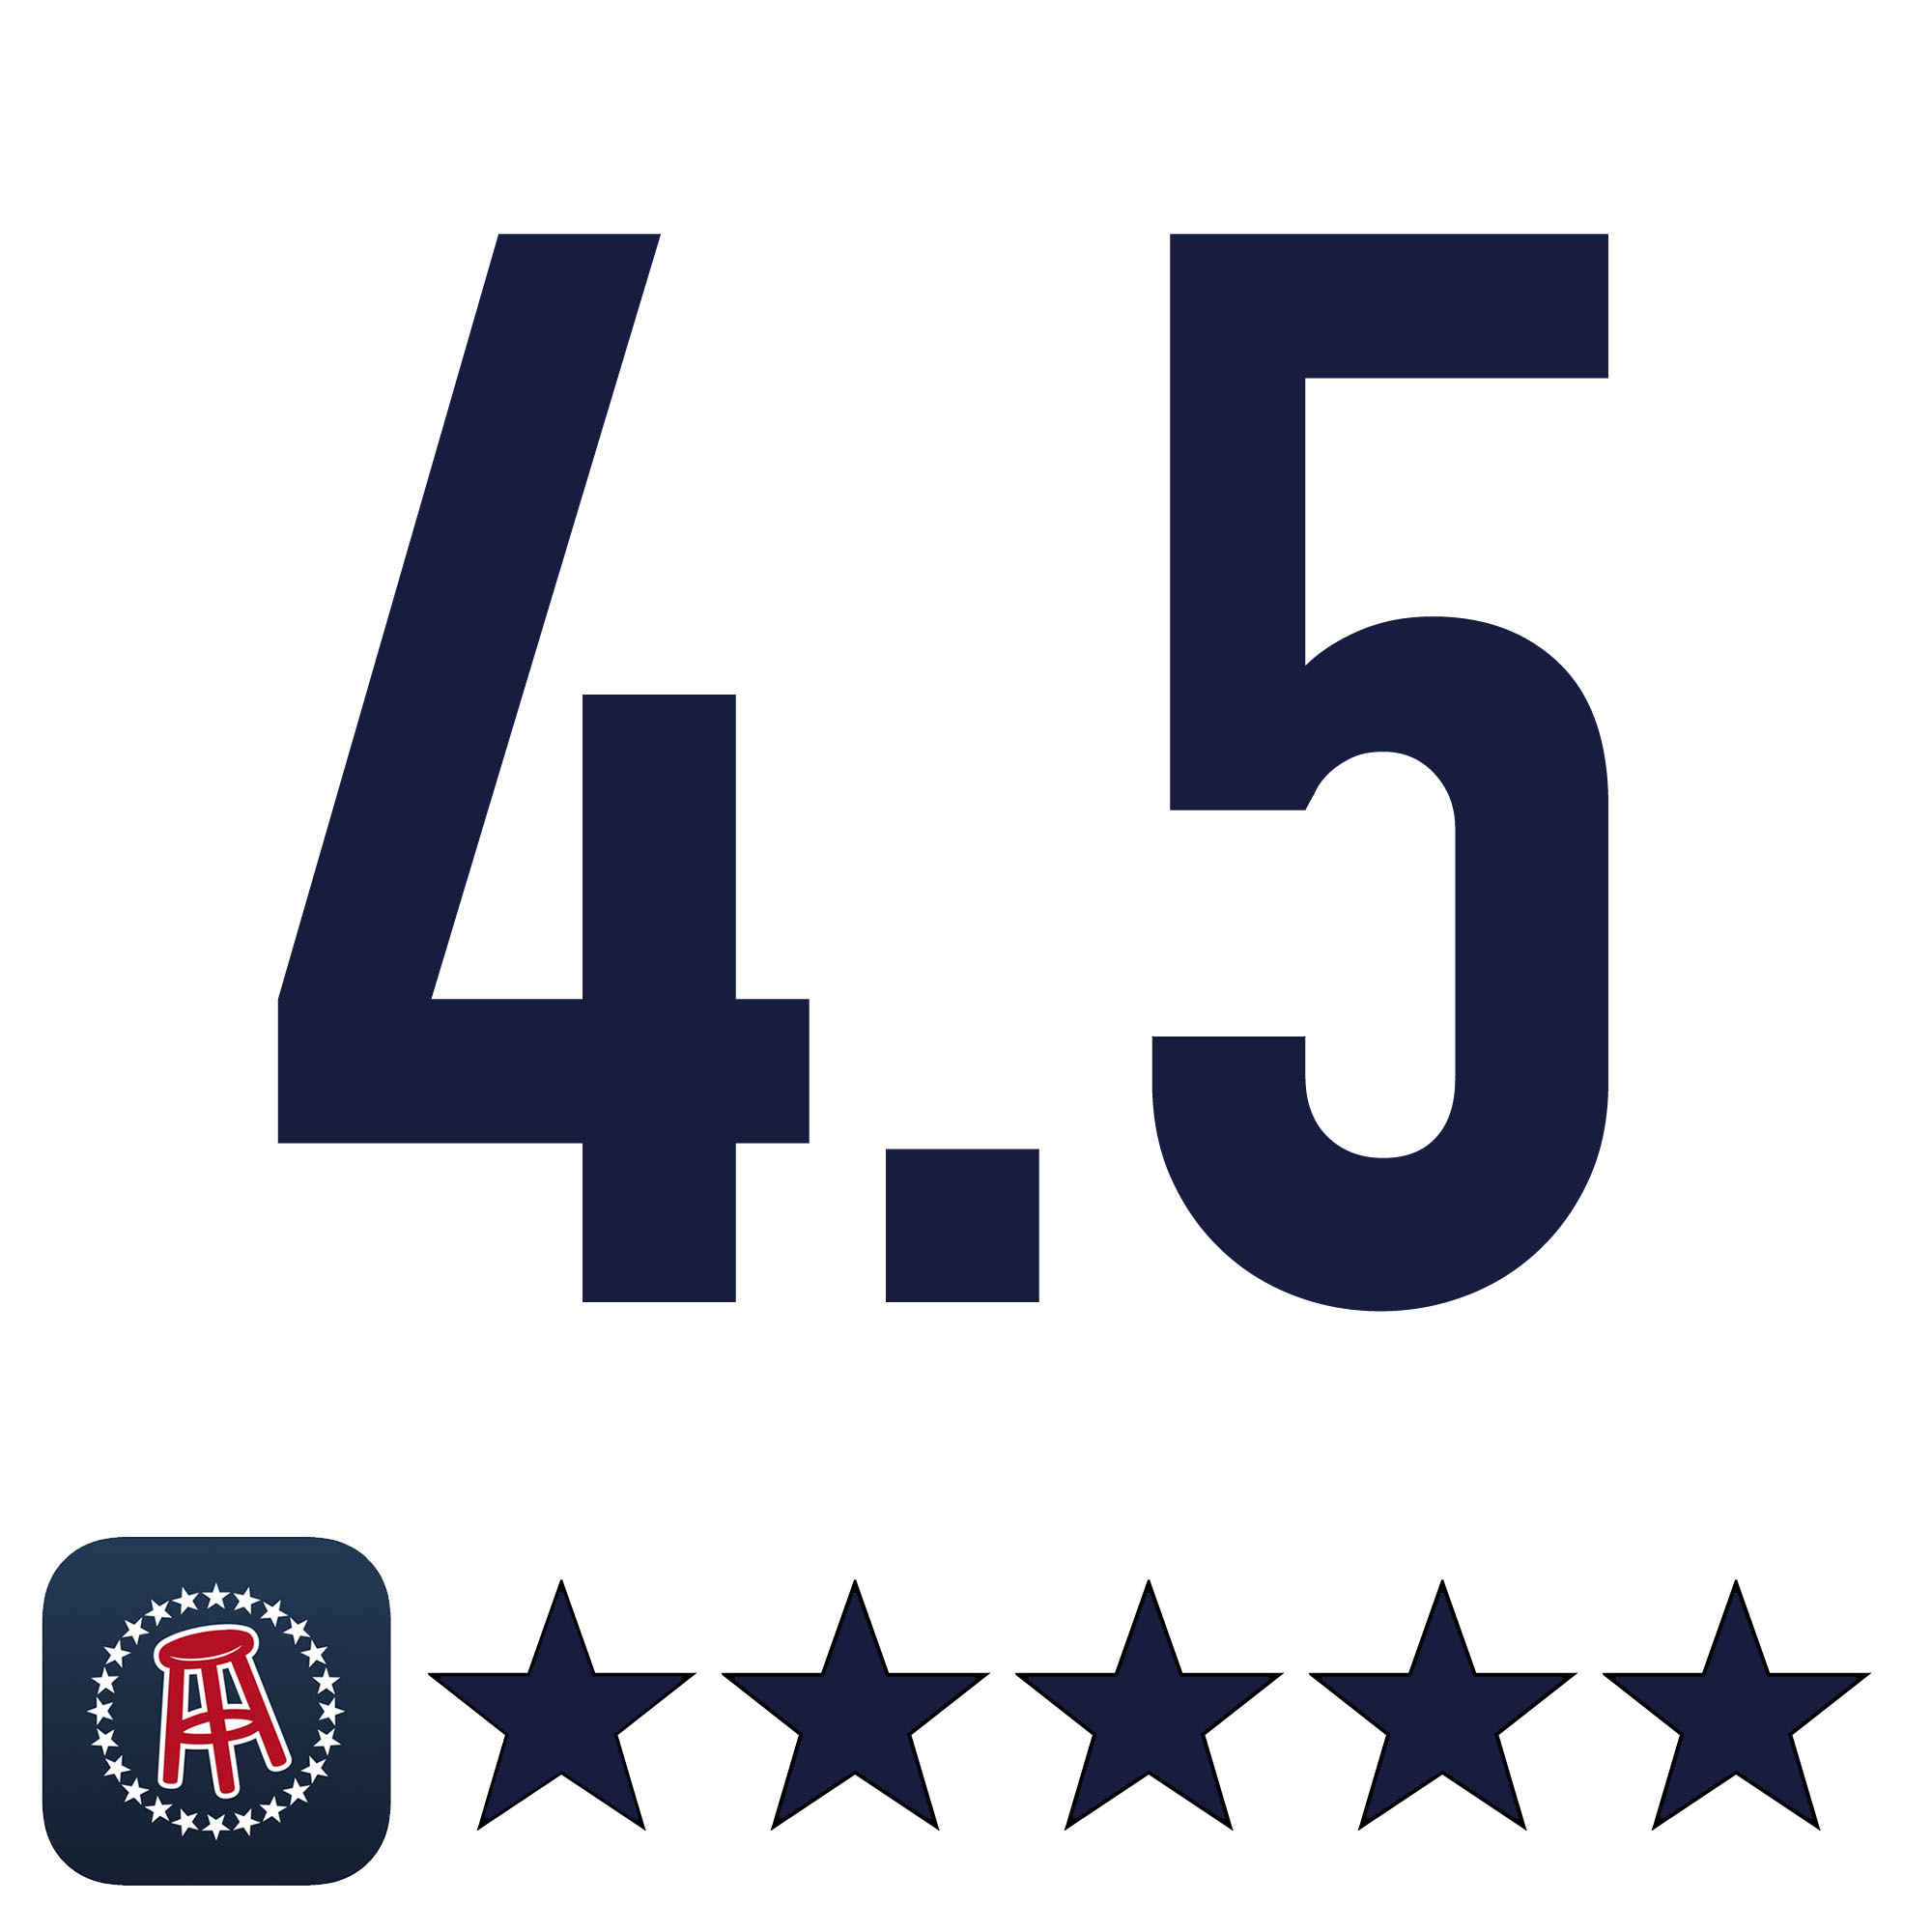 Barstool Sportsbook Review